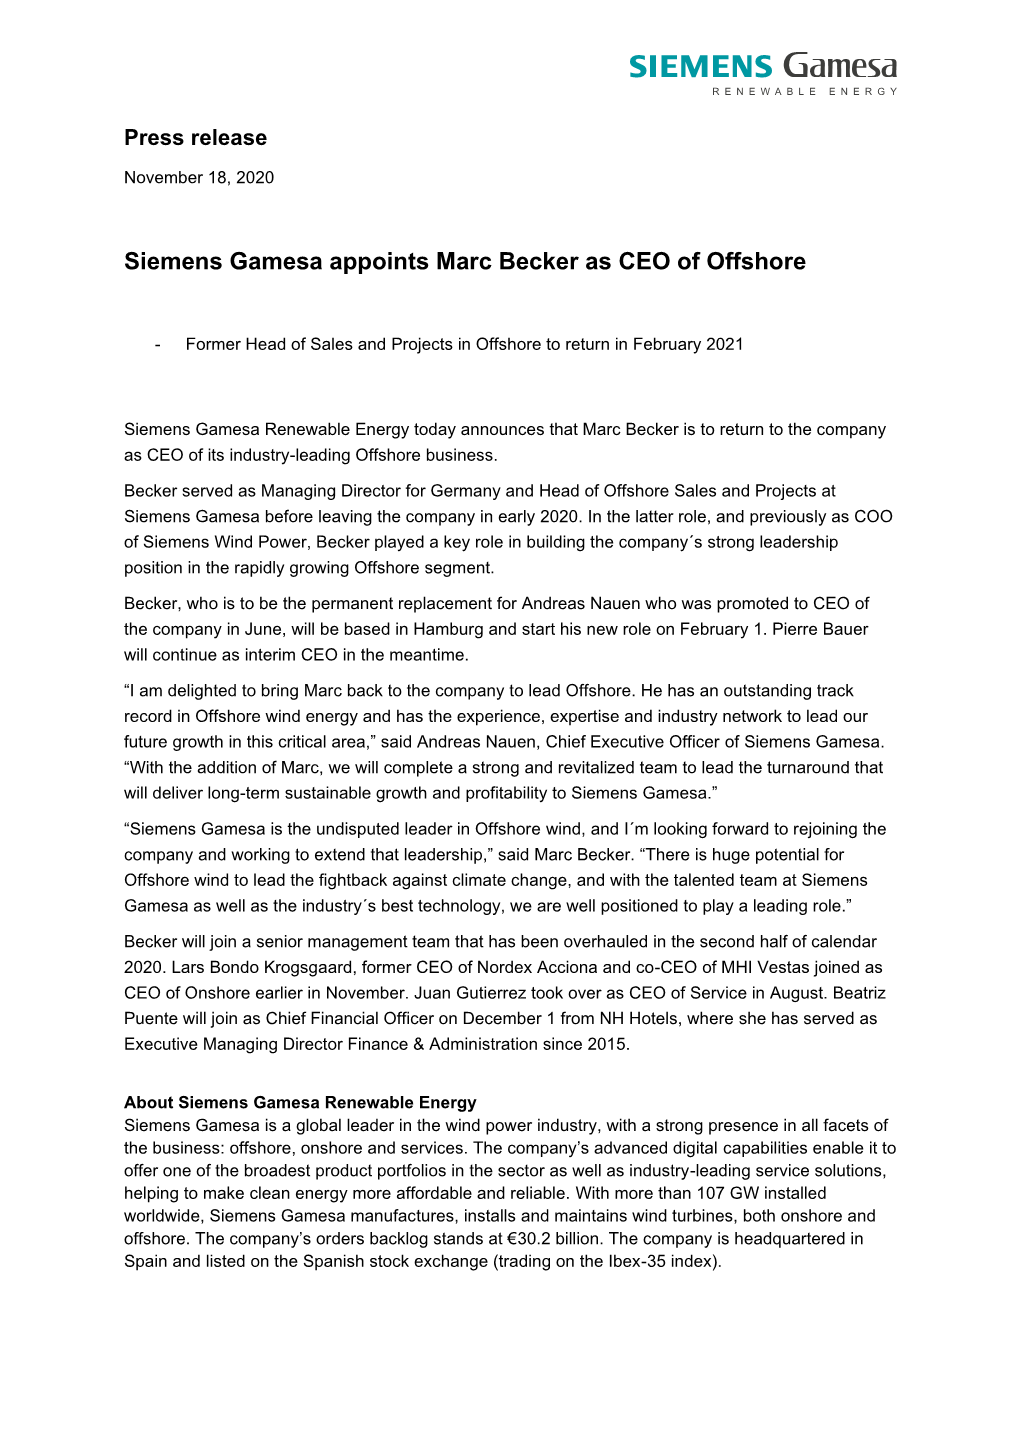 Siemens Gamesa Appoints Marc Becker As CEO of Offshore